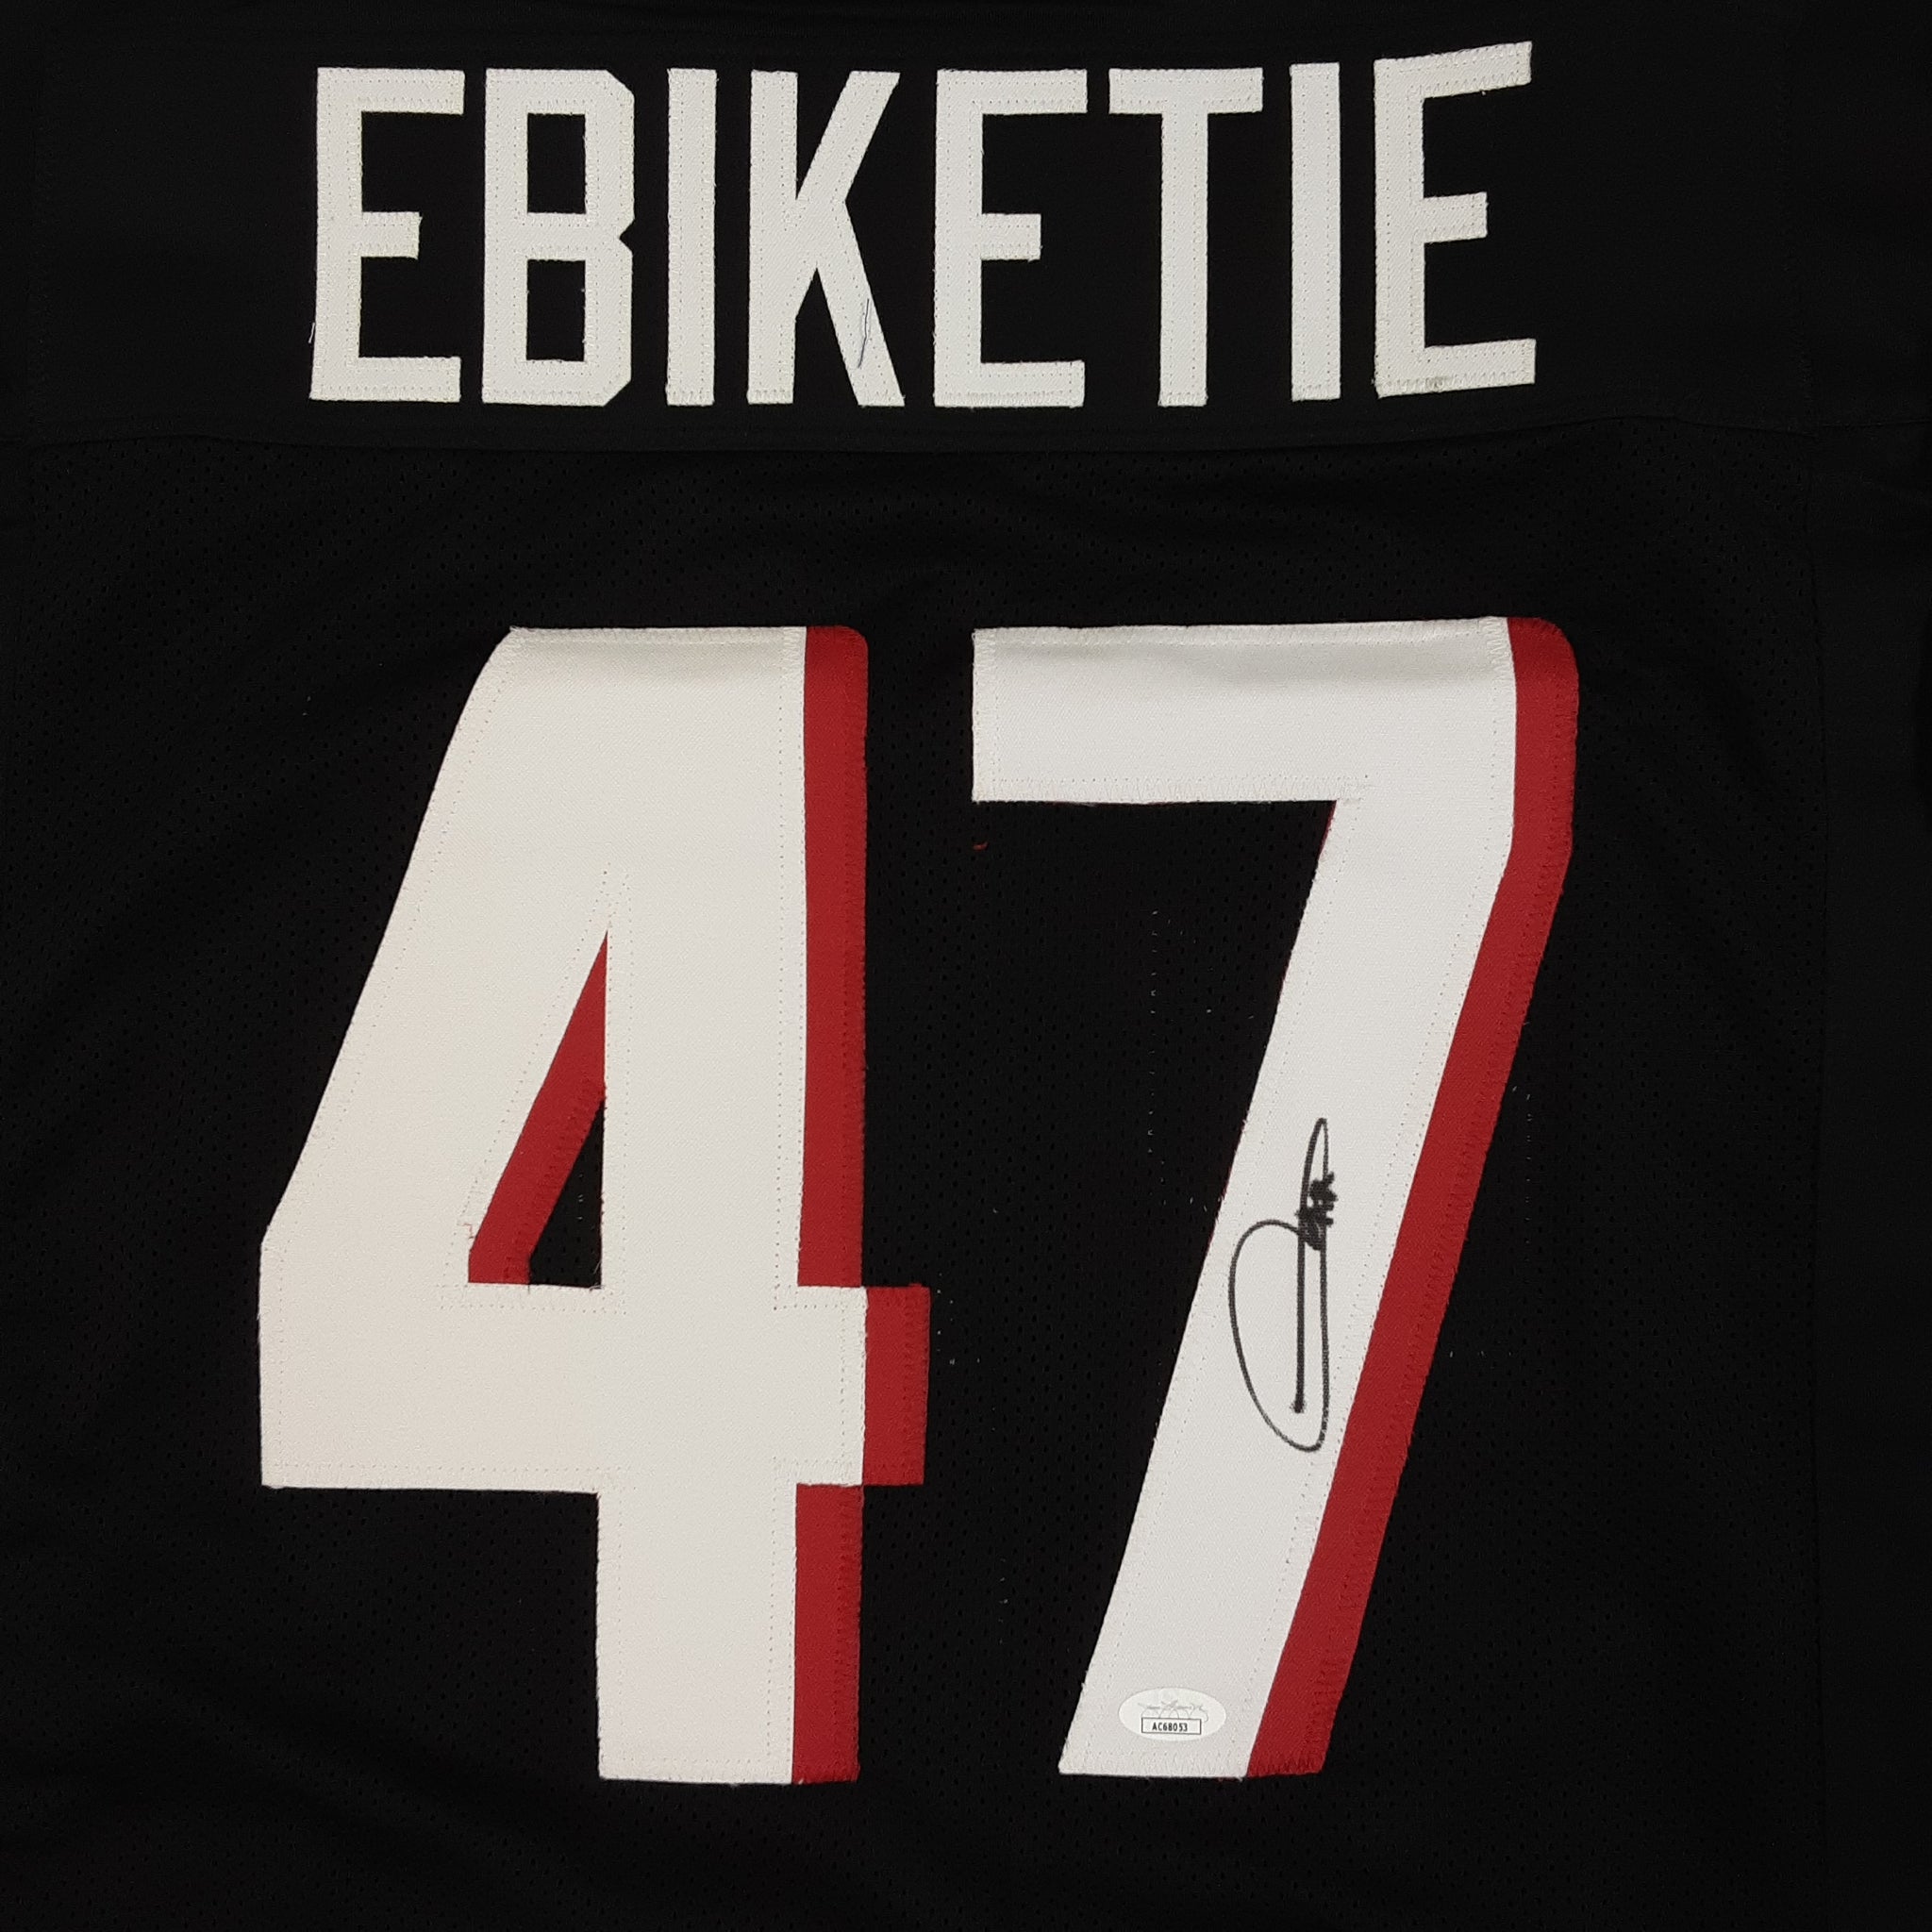 Arnold Ebiketie Authentic Signed Pro Style Jersey Autographed JSA